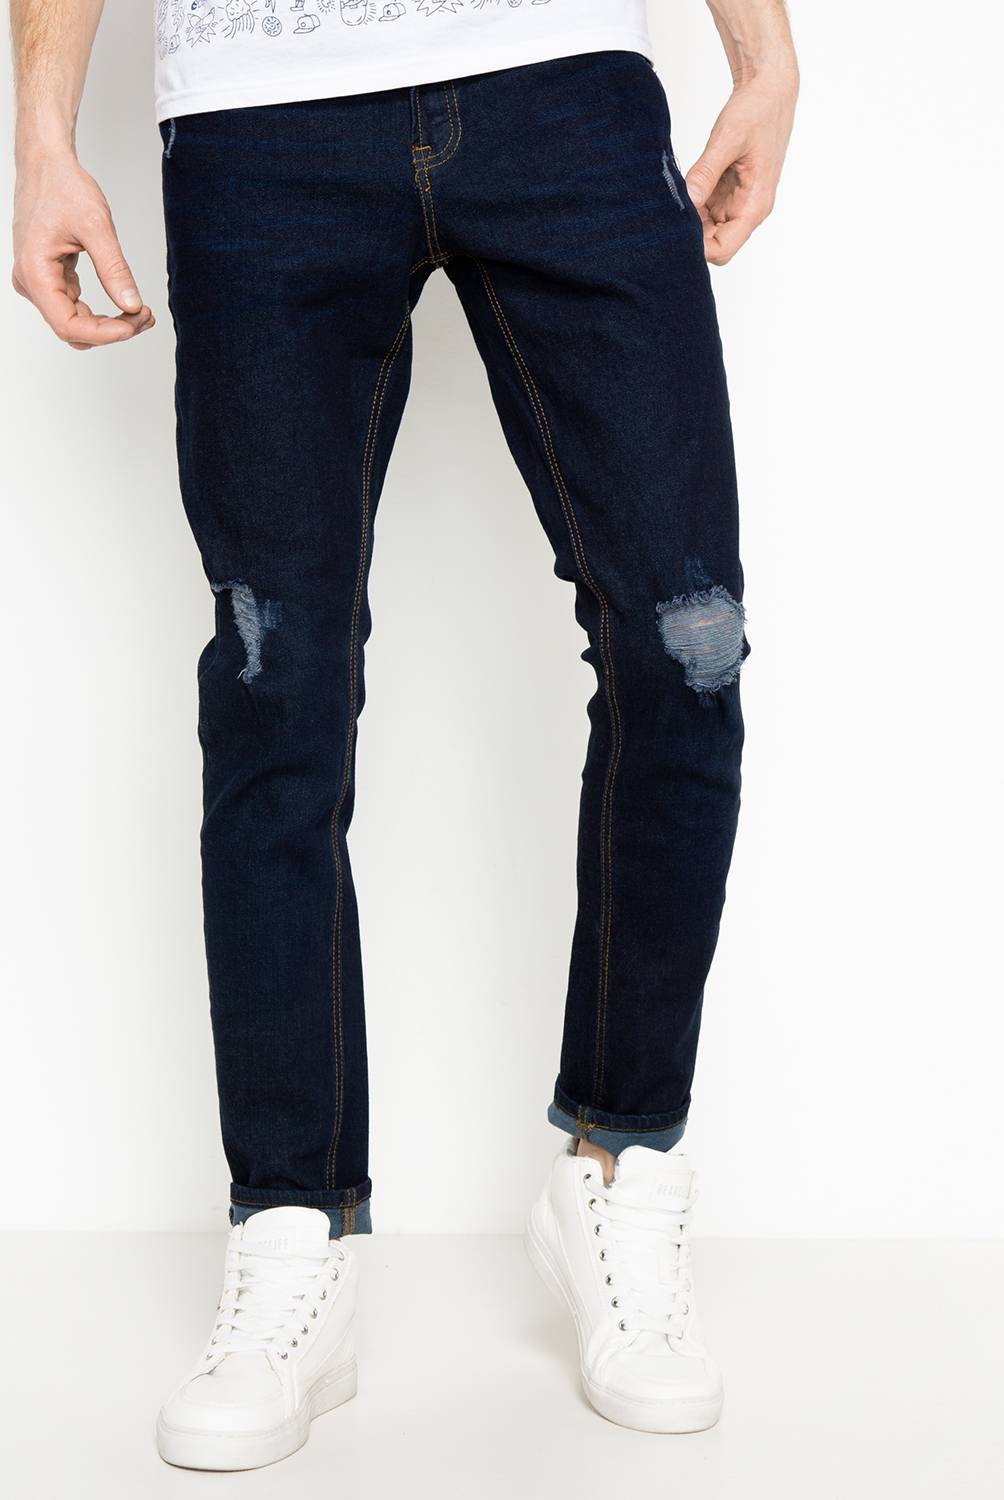 BEARCLIFF - Jeans Skinny Fit  Hombre Bearcliff